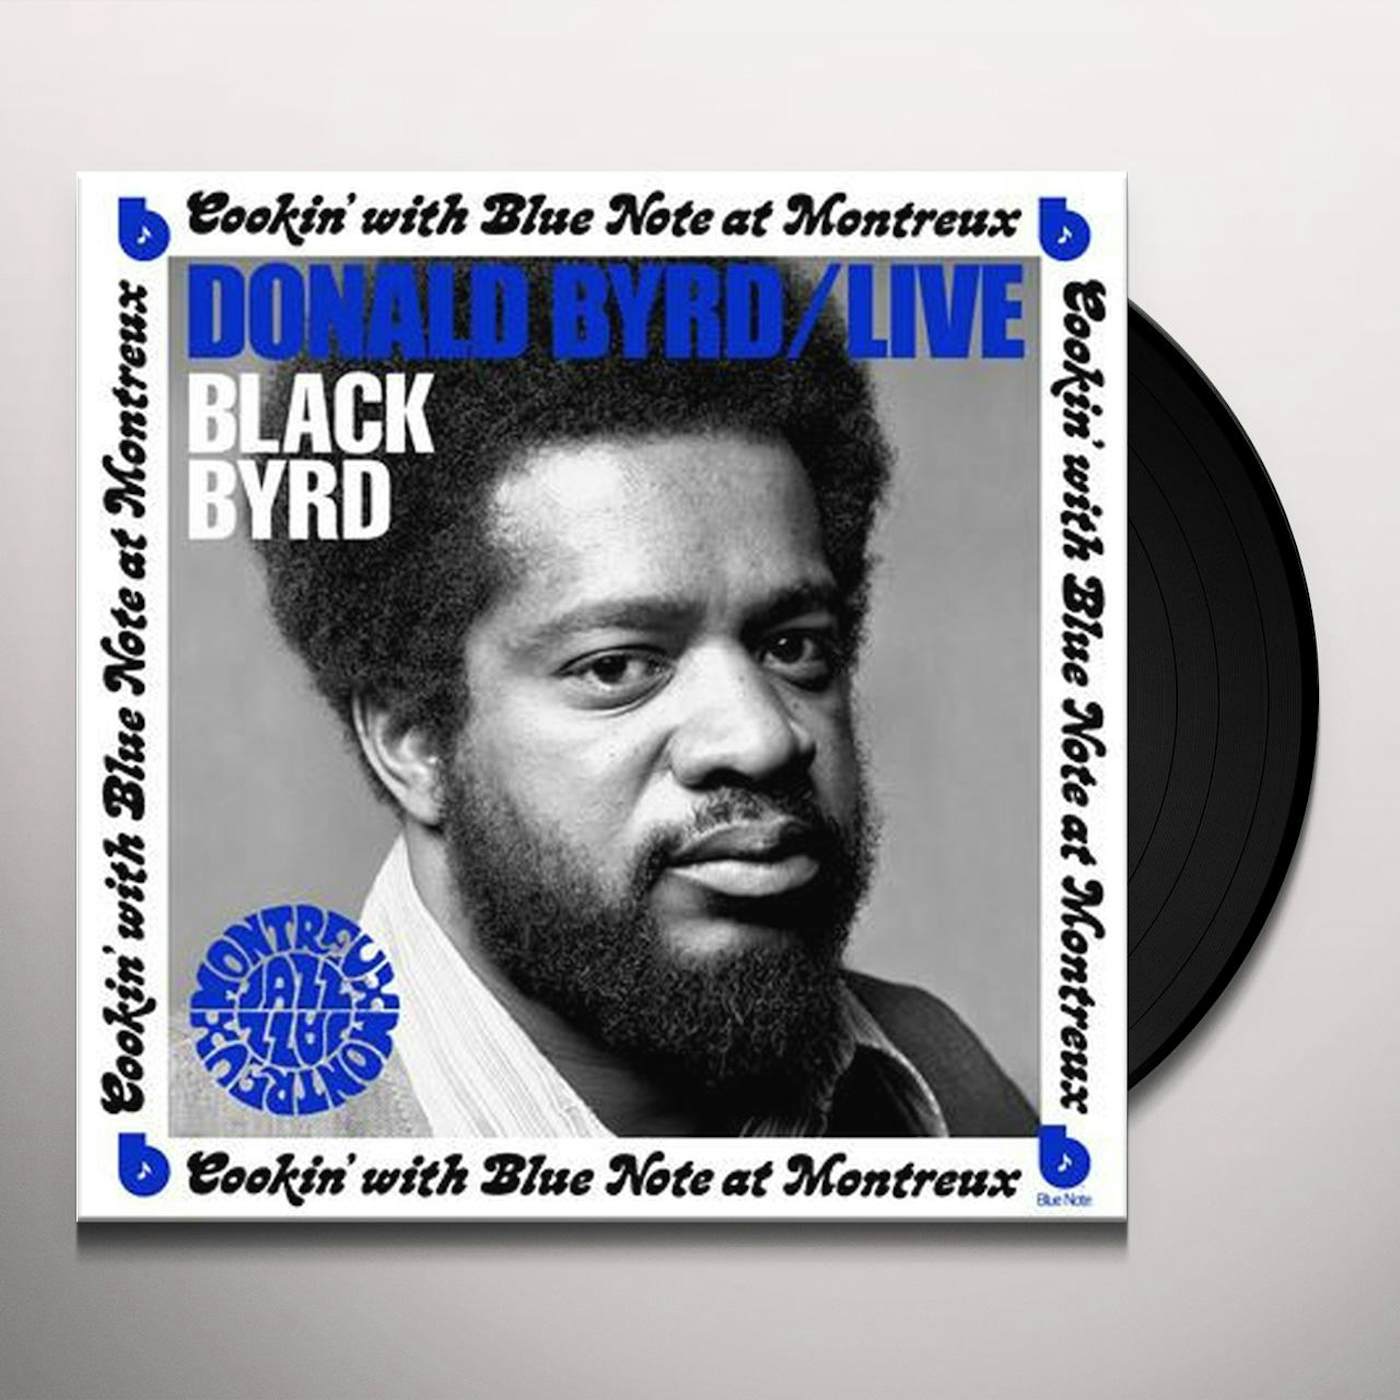 Donald Byrd LIVE: COOKIN' WITH BLUE NOTE AT MONTREUX JULY 5, 1973 Vinyl Record